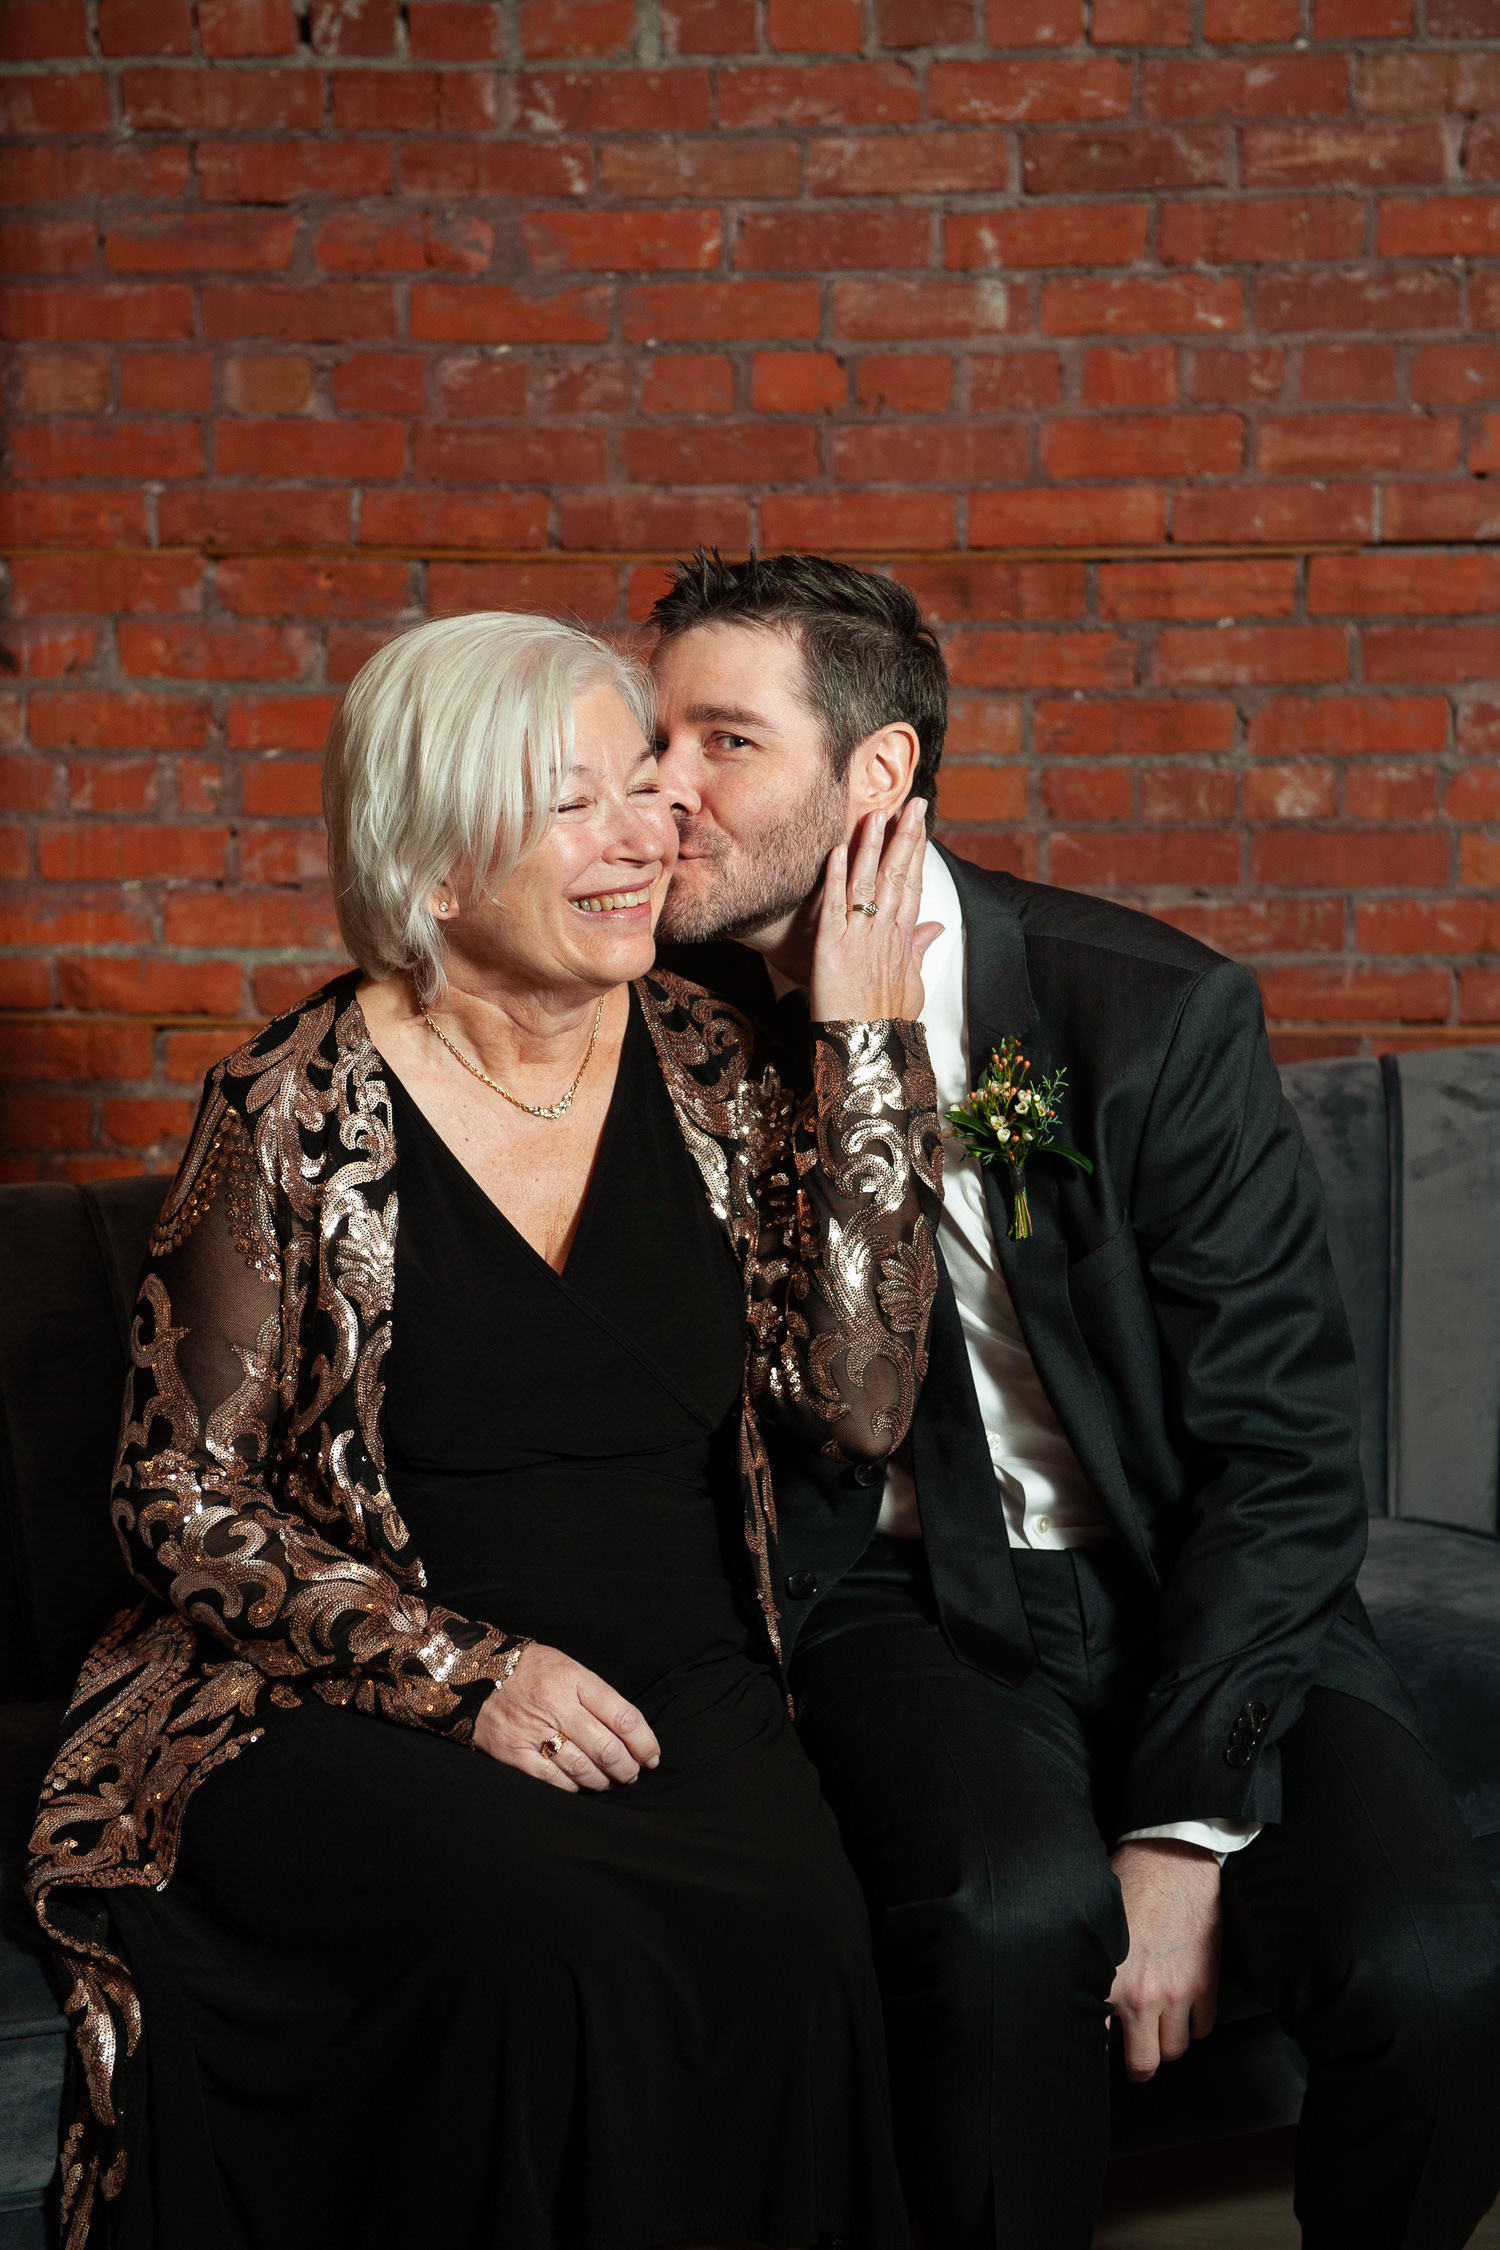 Groom and his Mom during family photos at Venue 308 captured by Tara Whittaker Photography